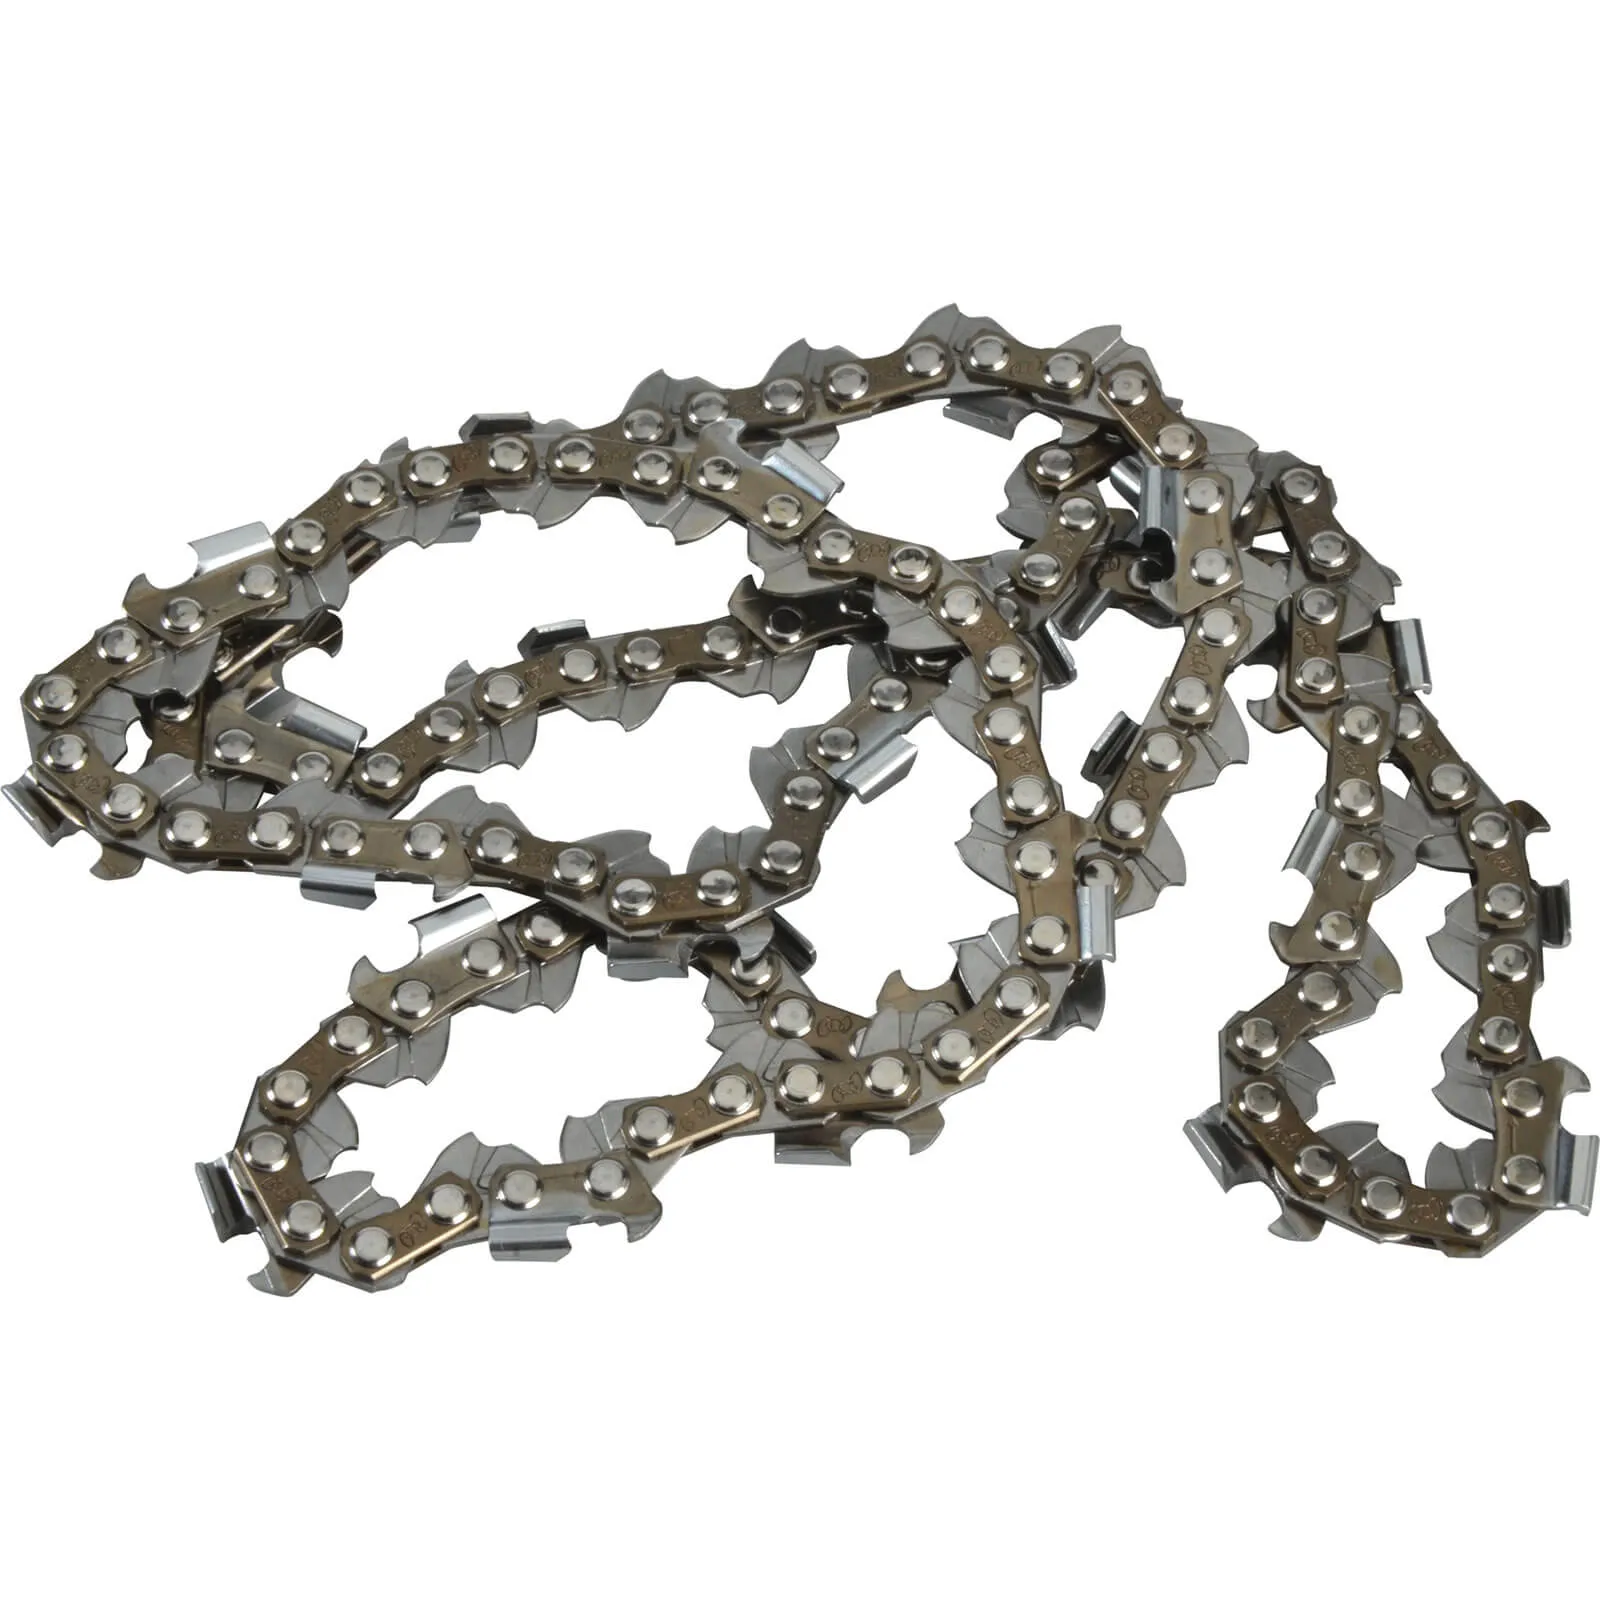 ALM CH064 Replacement Chainsaw Chain Fits Saws with a 40cm Bar and 64 Drive Links - 400mm